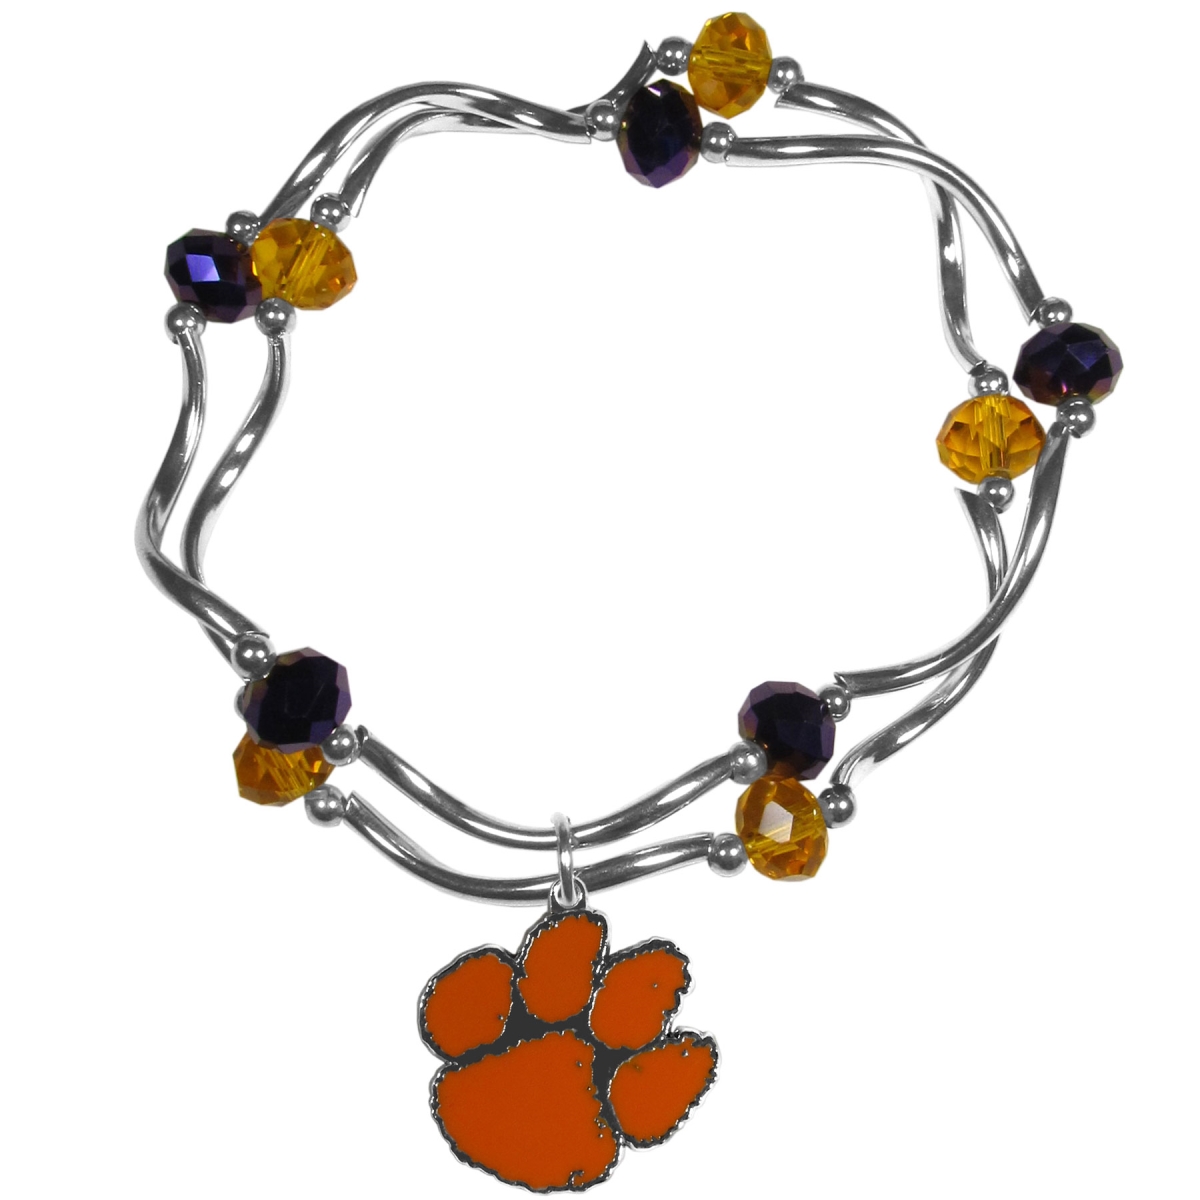 Picture of Siskiyou CCYB69 Female NCAA Clemson Tigers Crystal Bead Bracelet - One Size